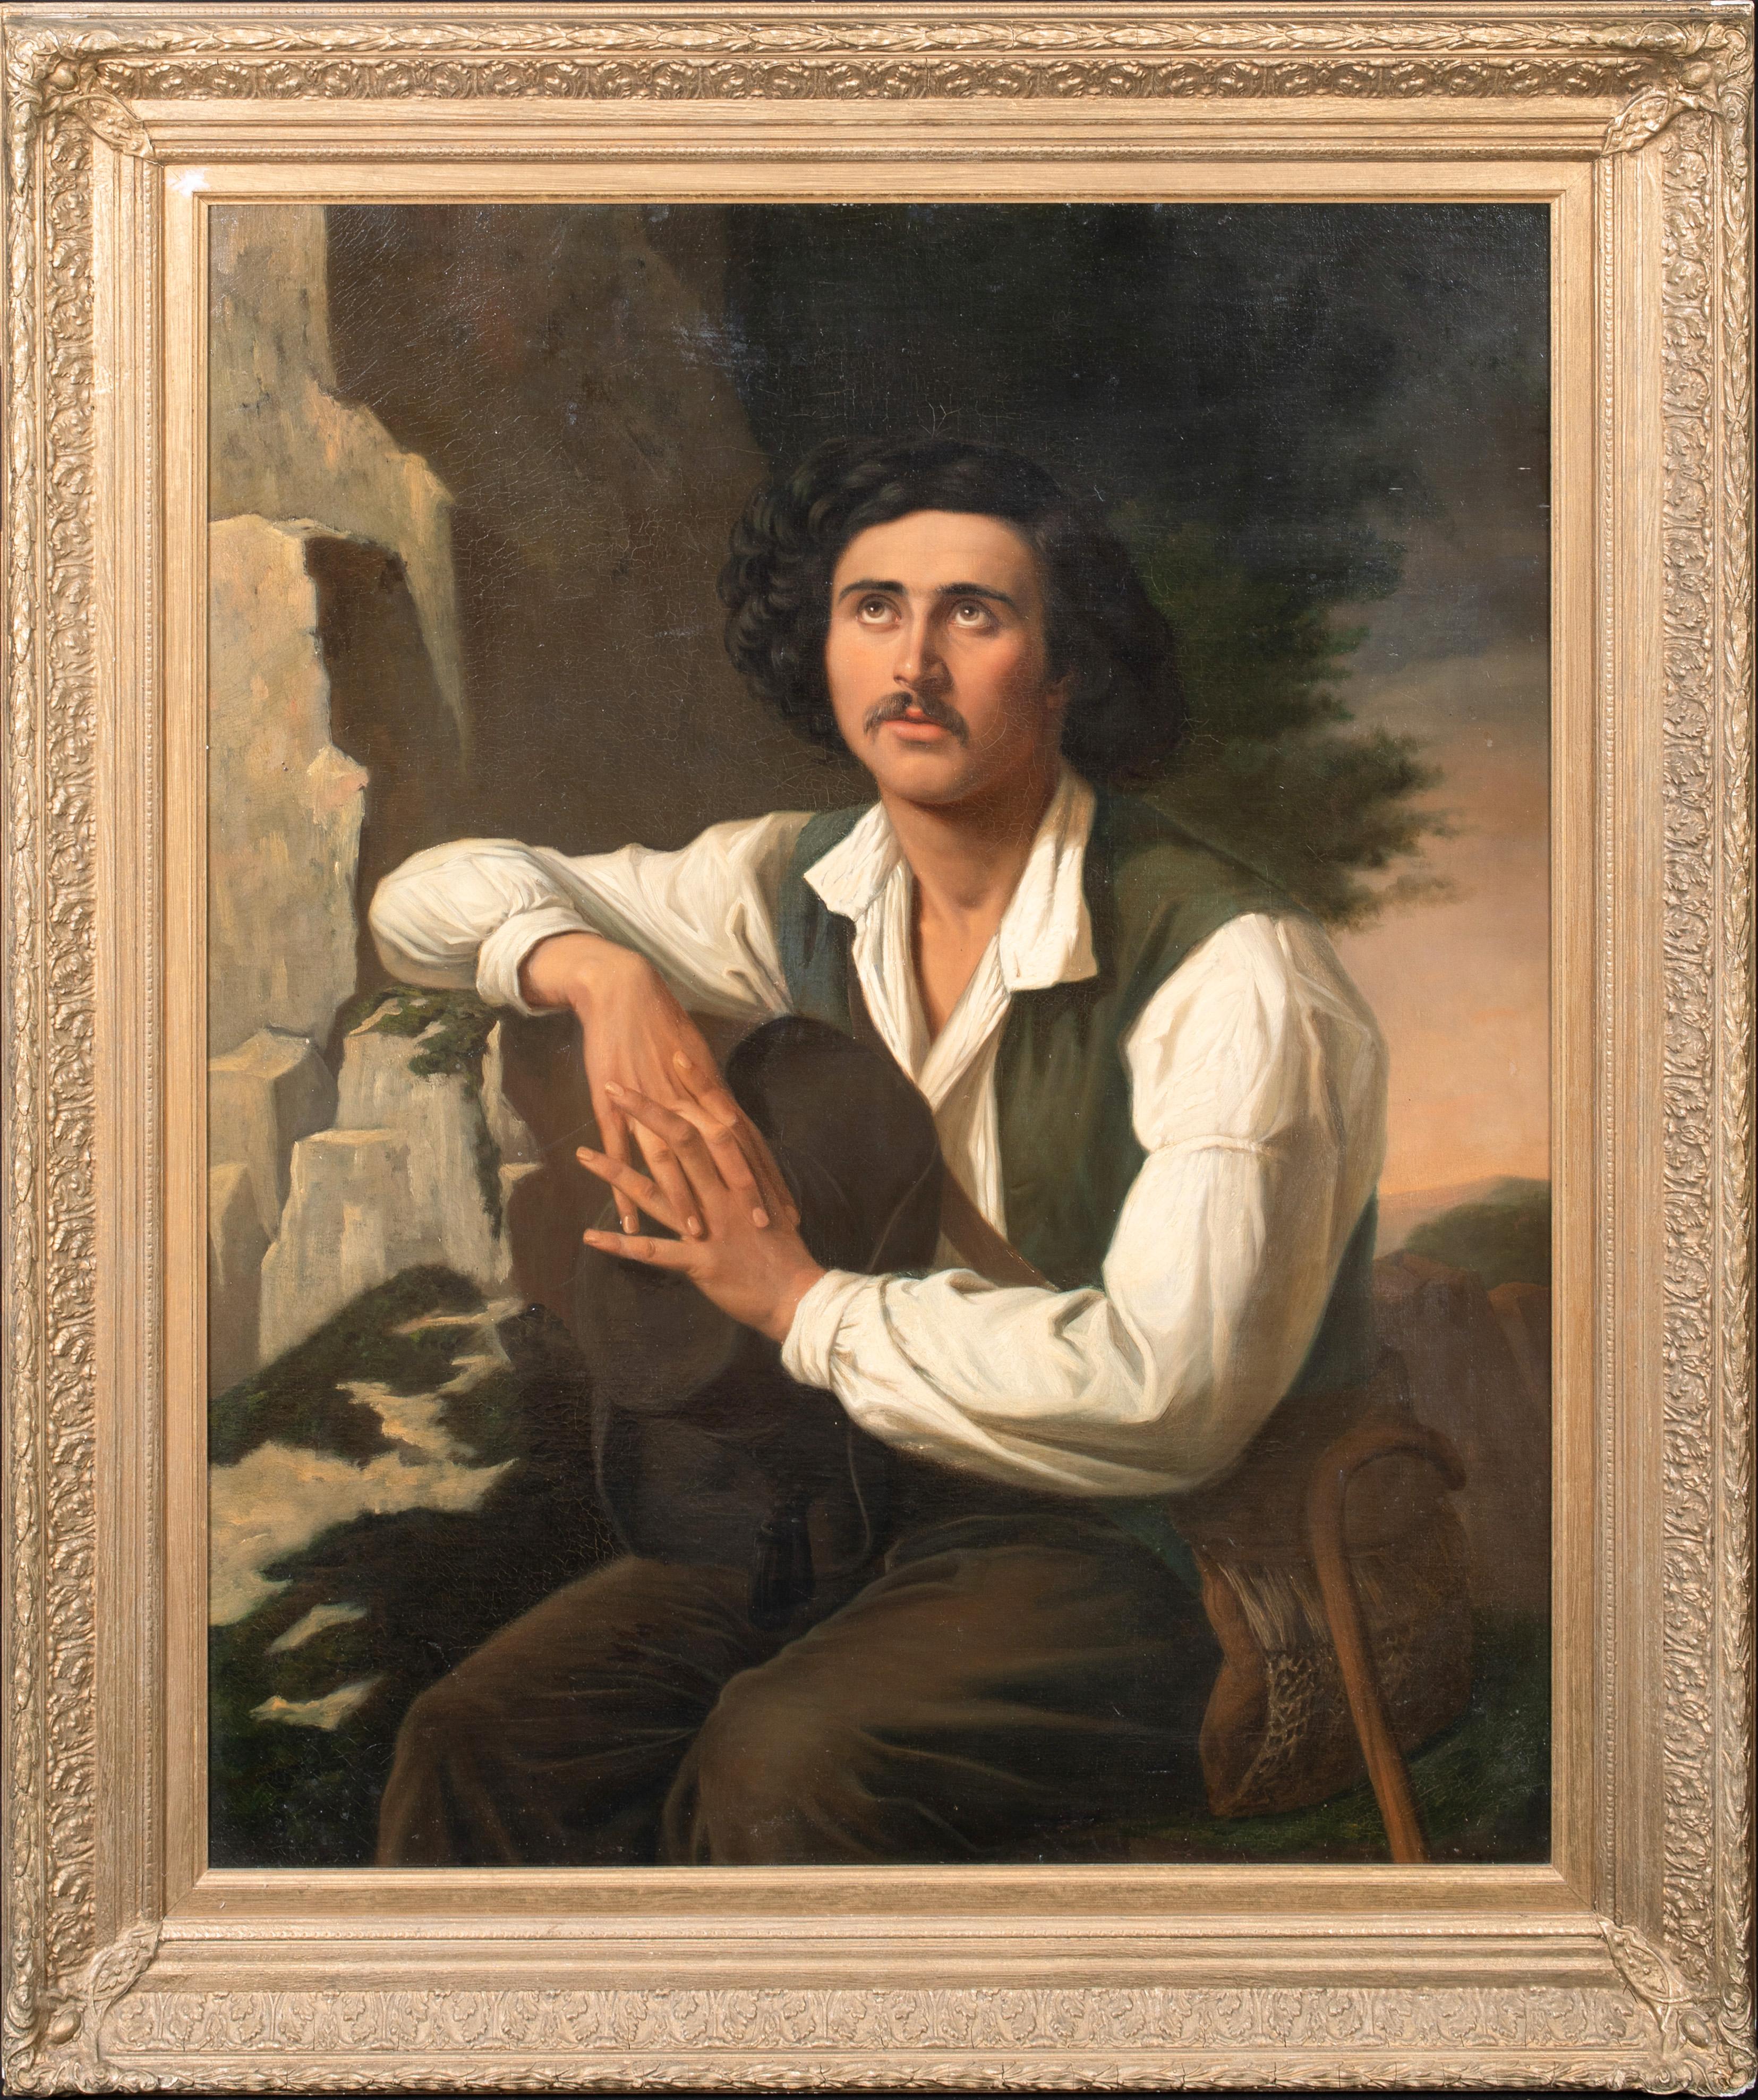 Unknown Portrait Painting - Portrait Of An Gentleman In The Mountains, 19th Century